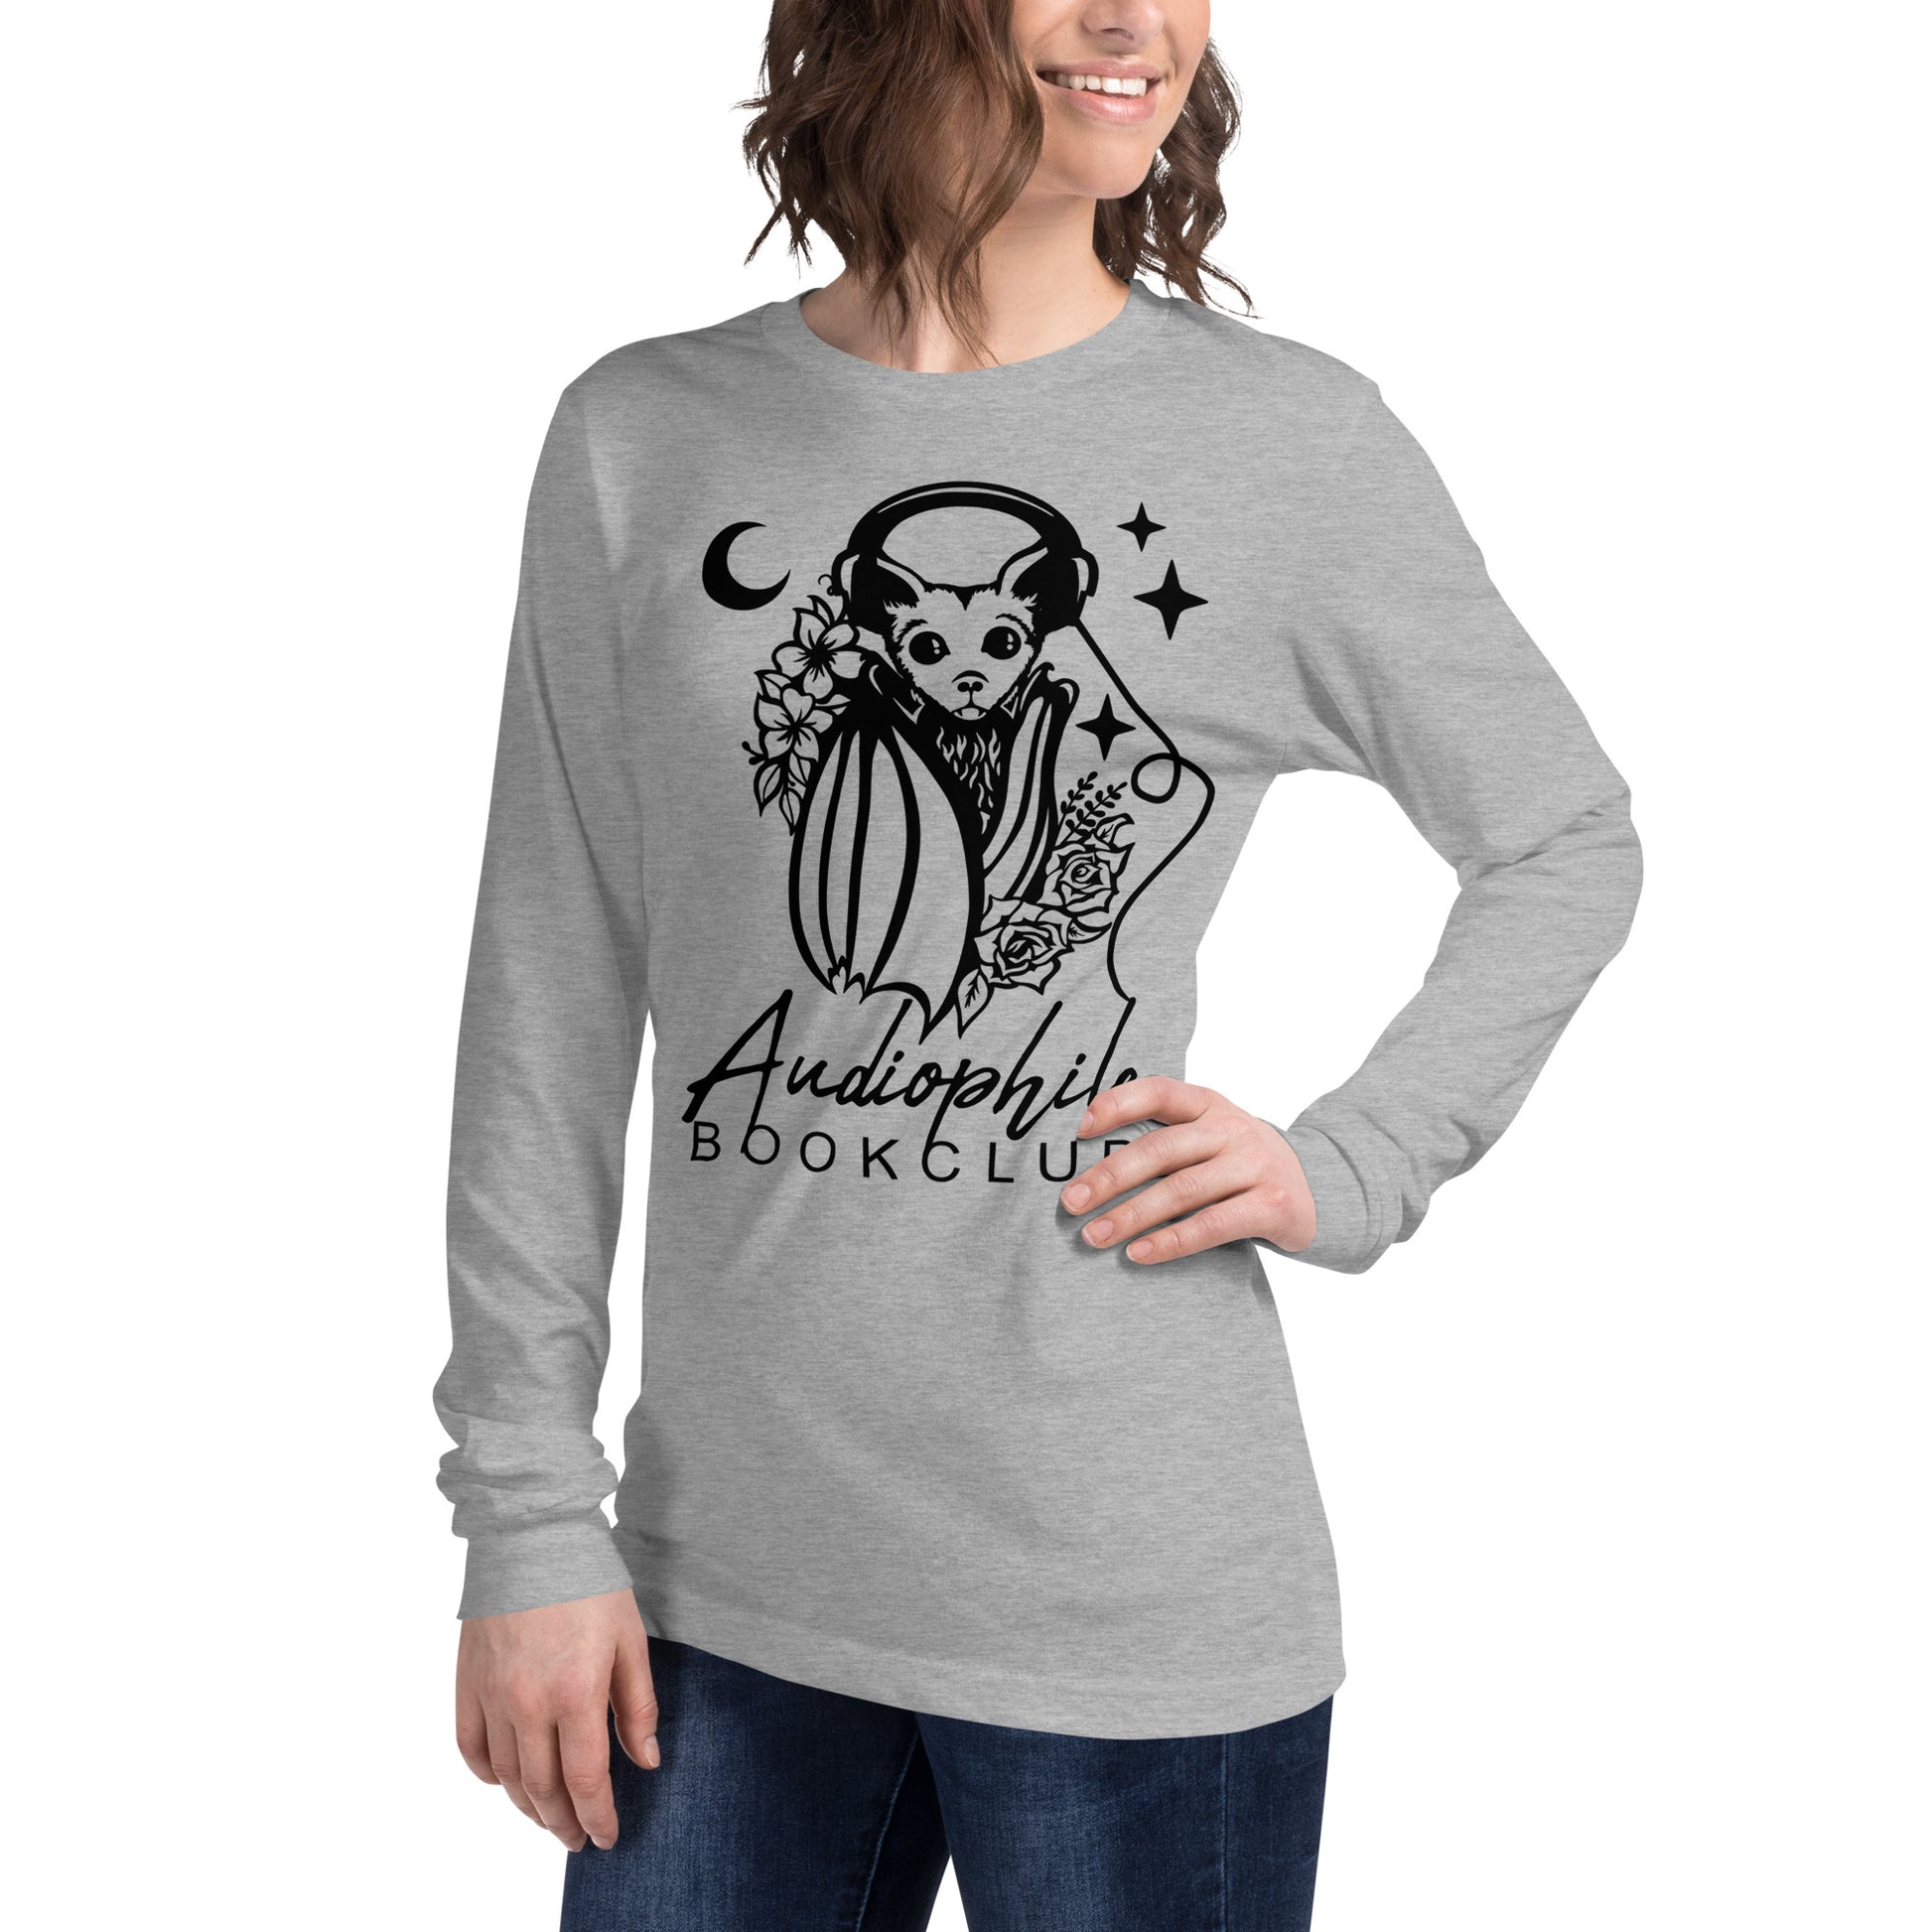 Audiophile Book Club Unisex Long Sleeve Tee from FireDrake Artistry 